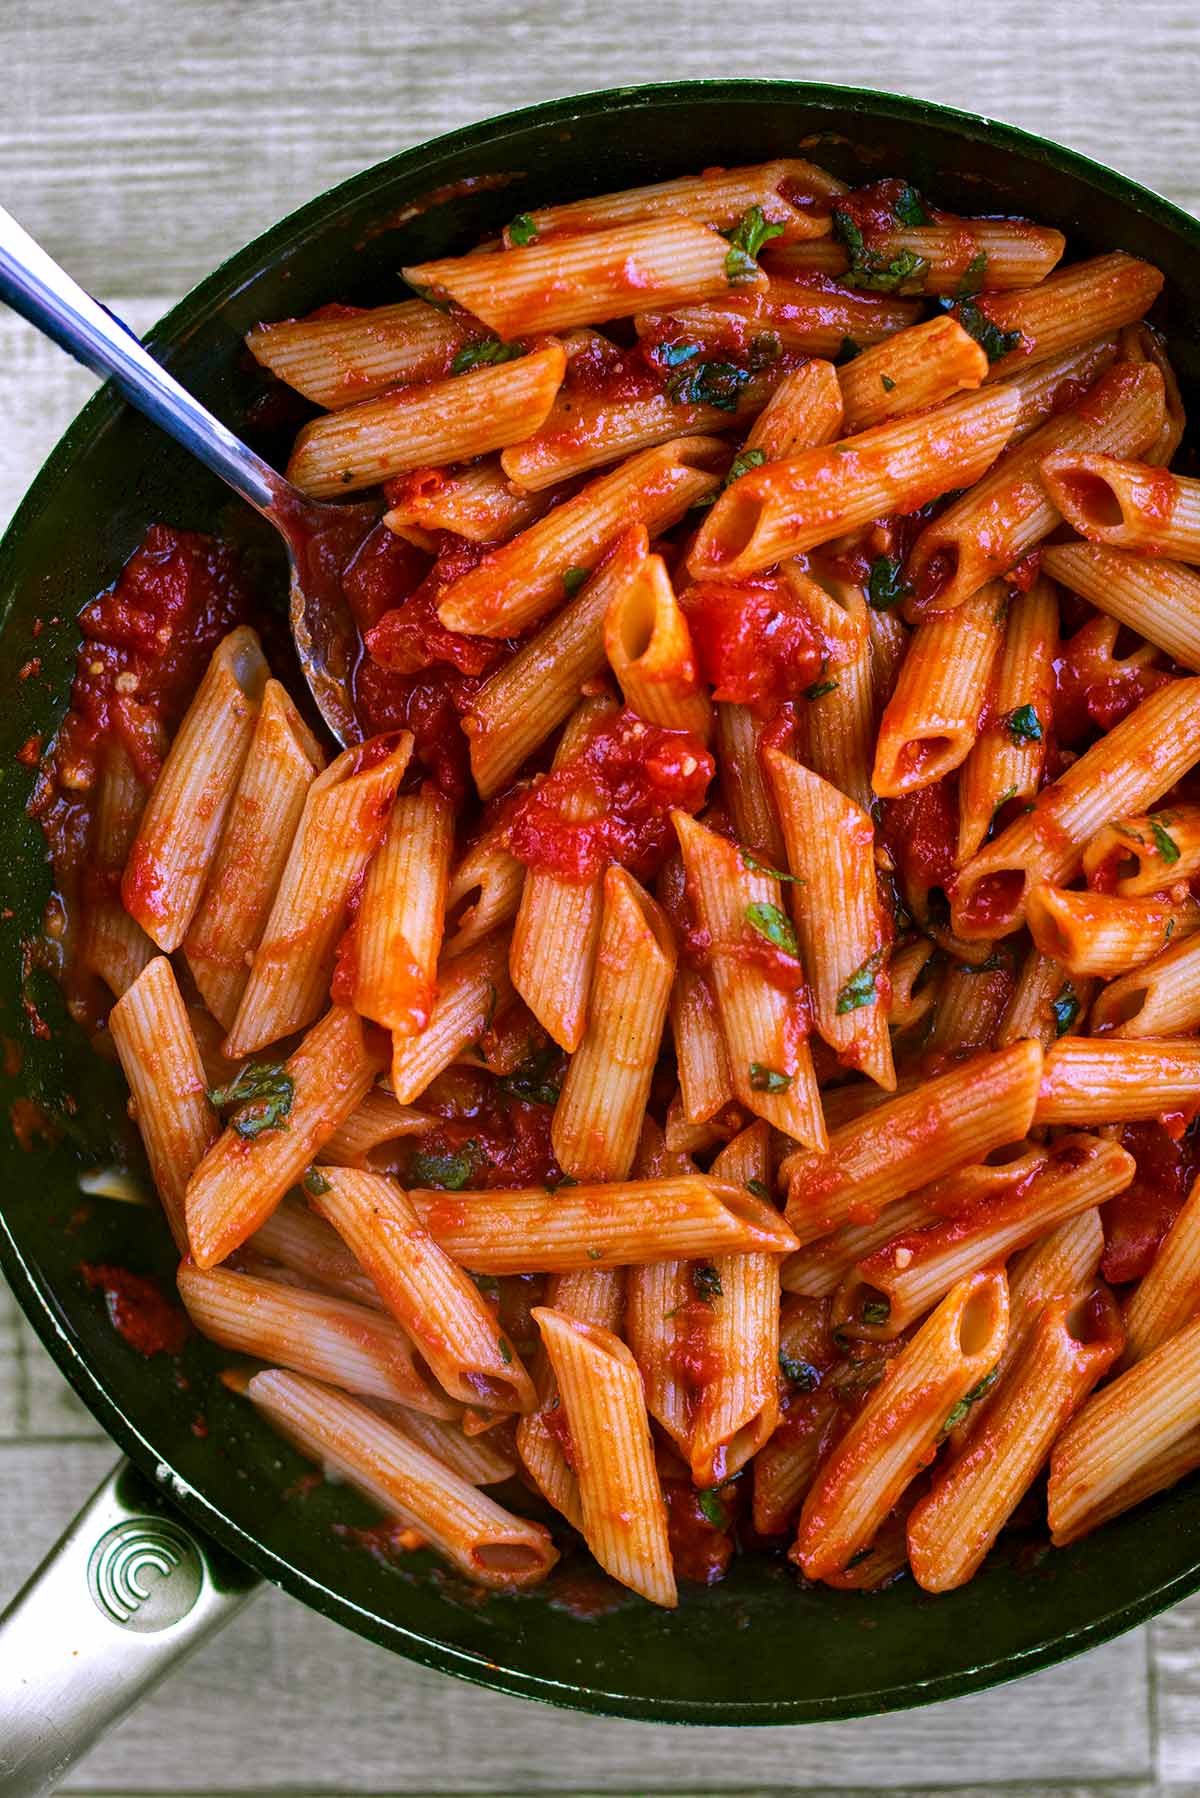 Cooked penne pasta mixed with arrabbiata sauce.